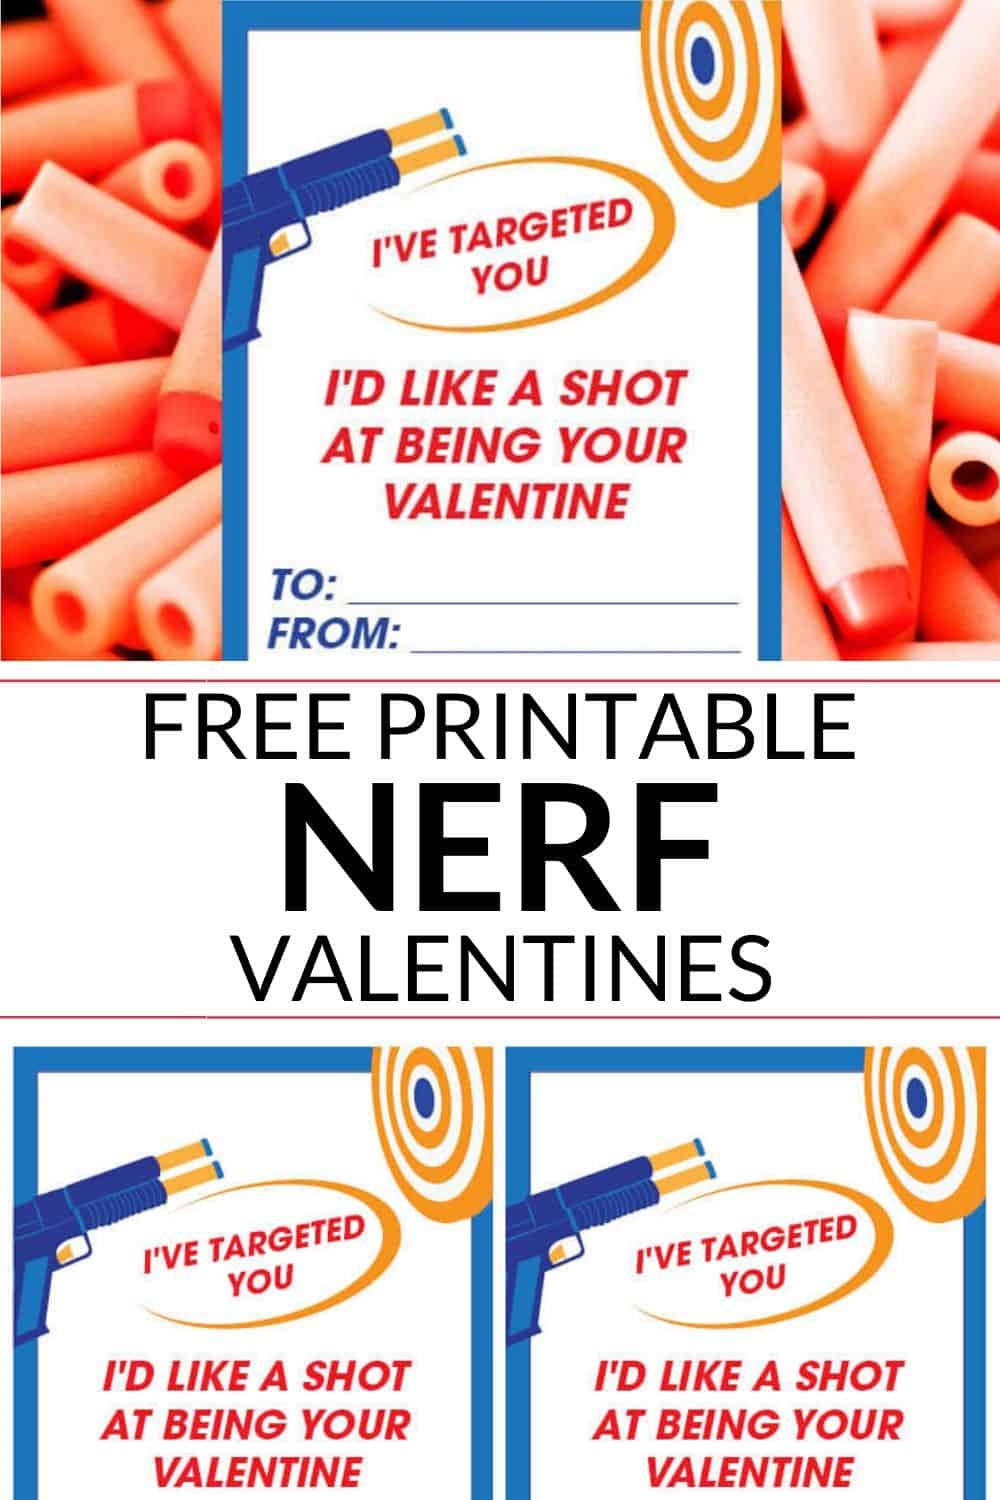 Nerf printable valentine on a bed of nerf darts